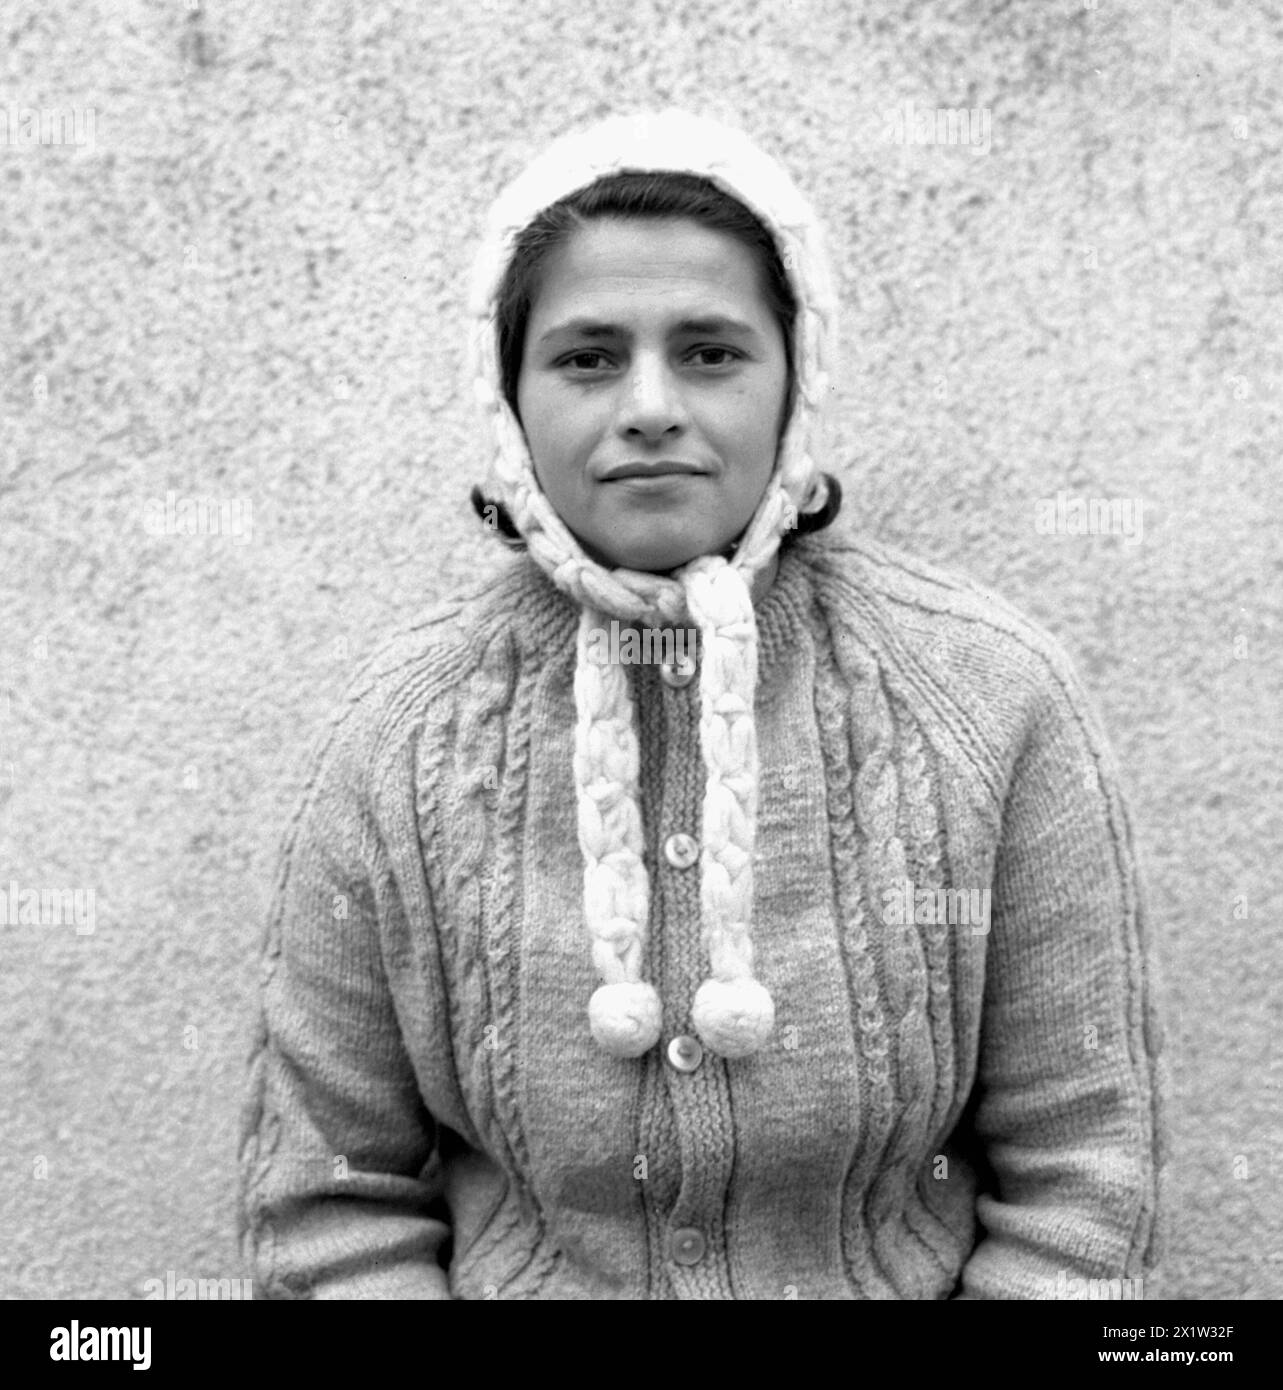 Socialist Republic of Romania in the 1970s. Portrait of a young woman wearing handmade knitted hat and sweater. Stock Photo